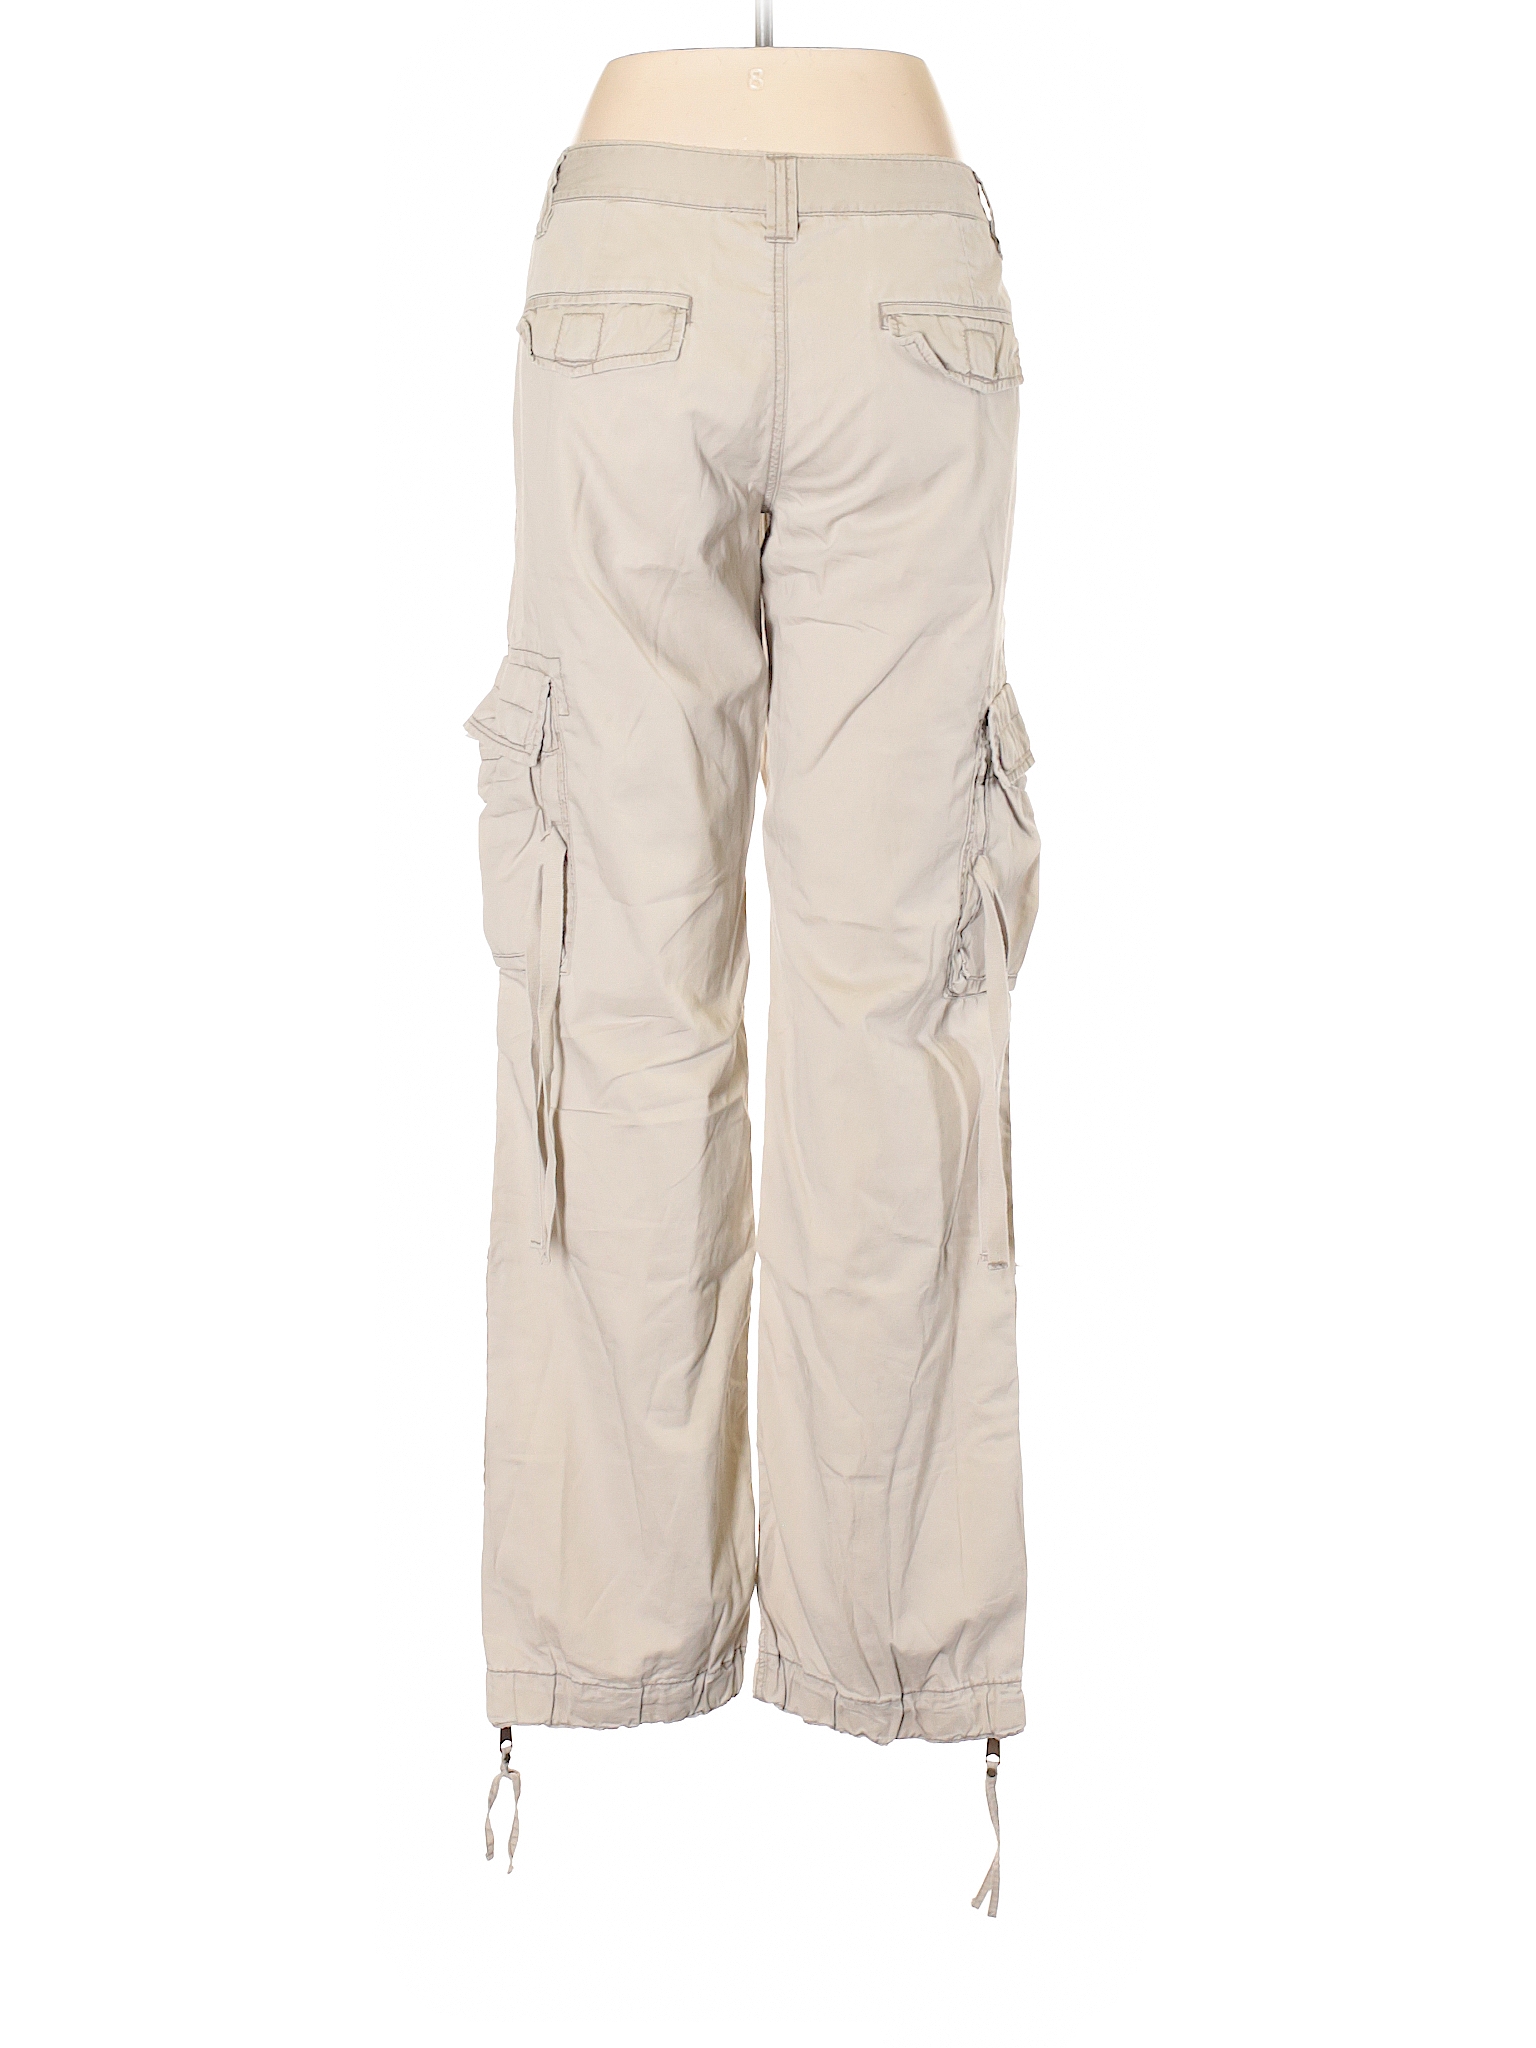 American Eagle Outfitters 100% Cotton Solid Beige Cargo Pants Size